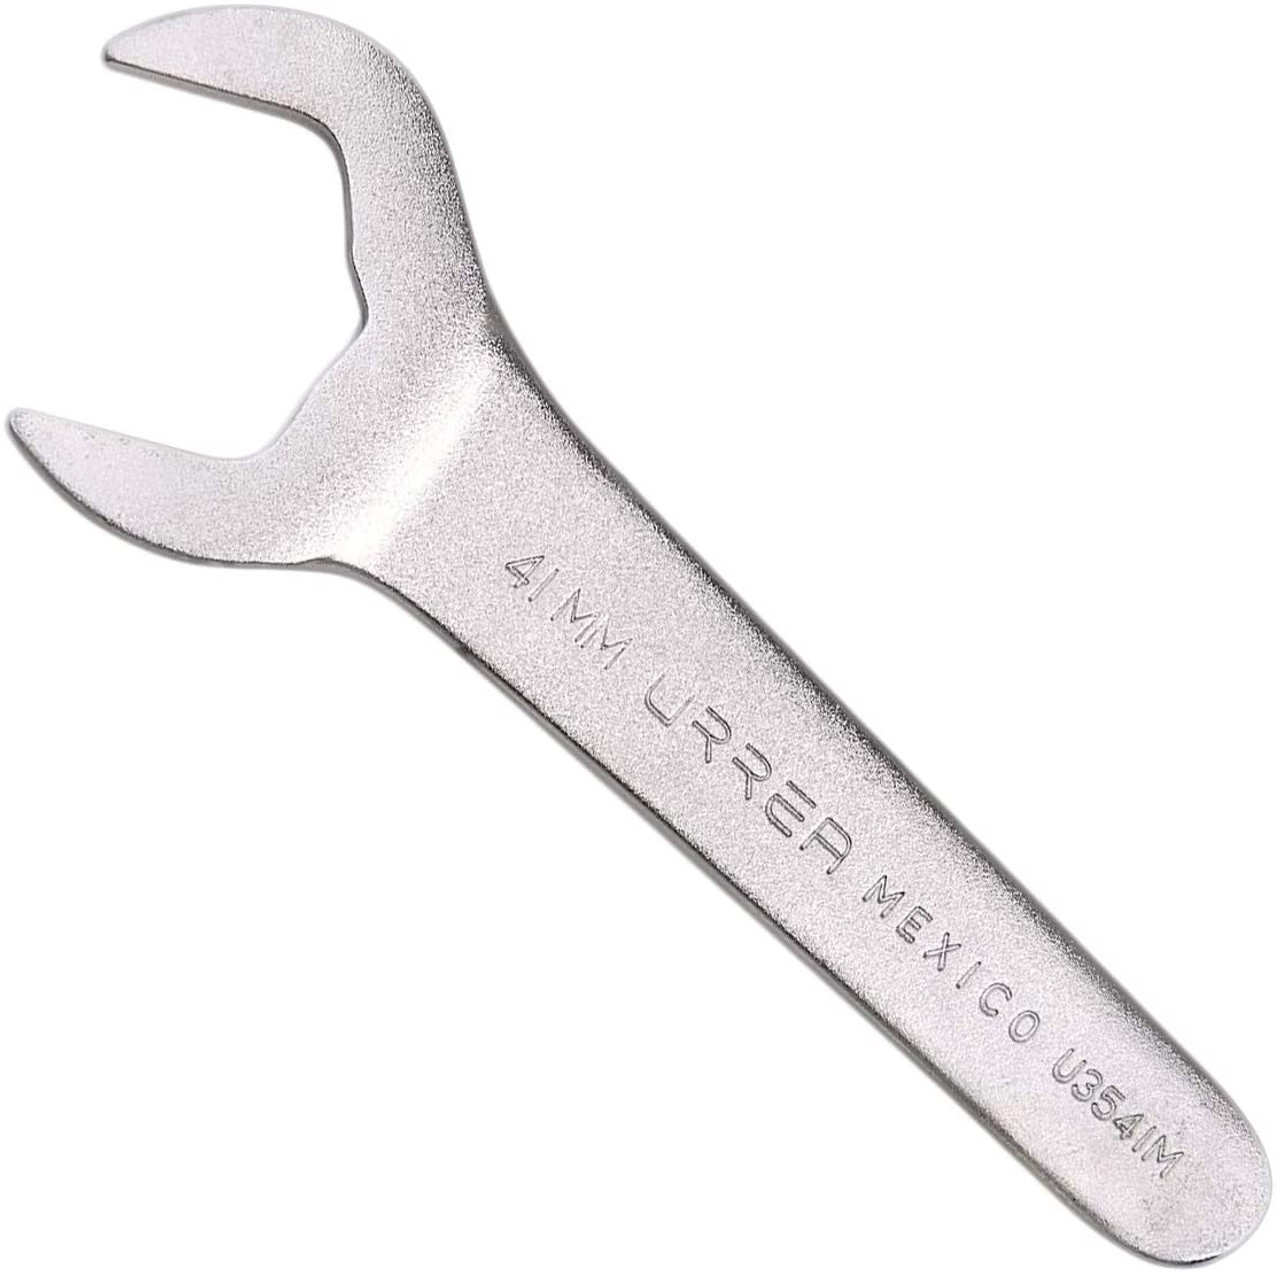 Satin Finish Service wrench, Size: 1-9/16, Total Length: 7-5/8"